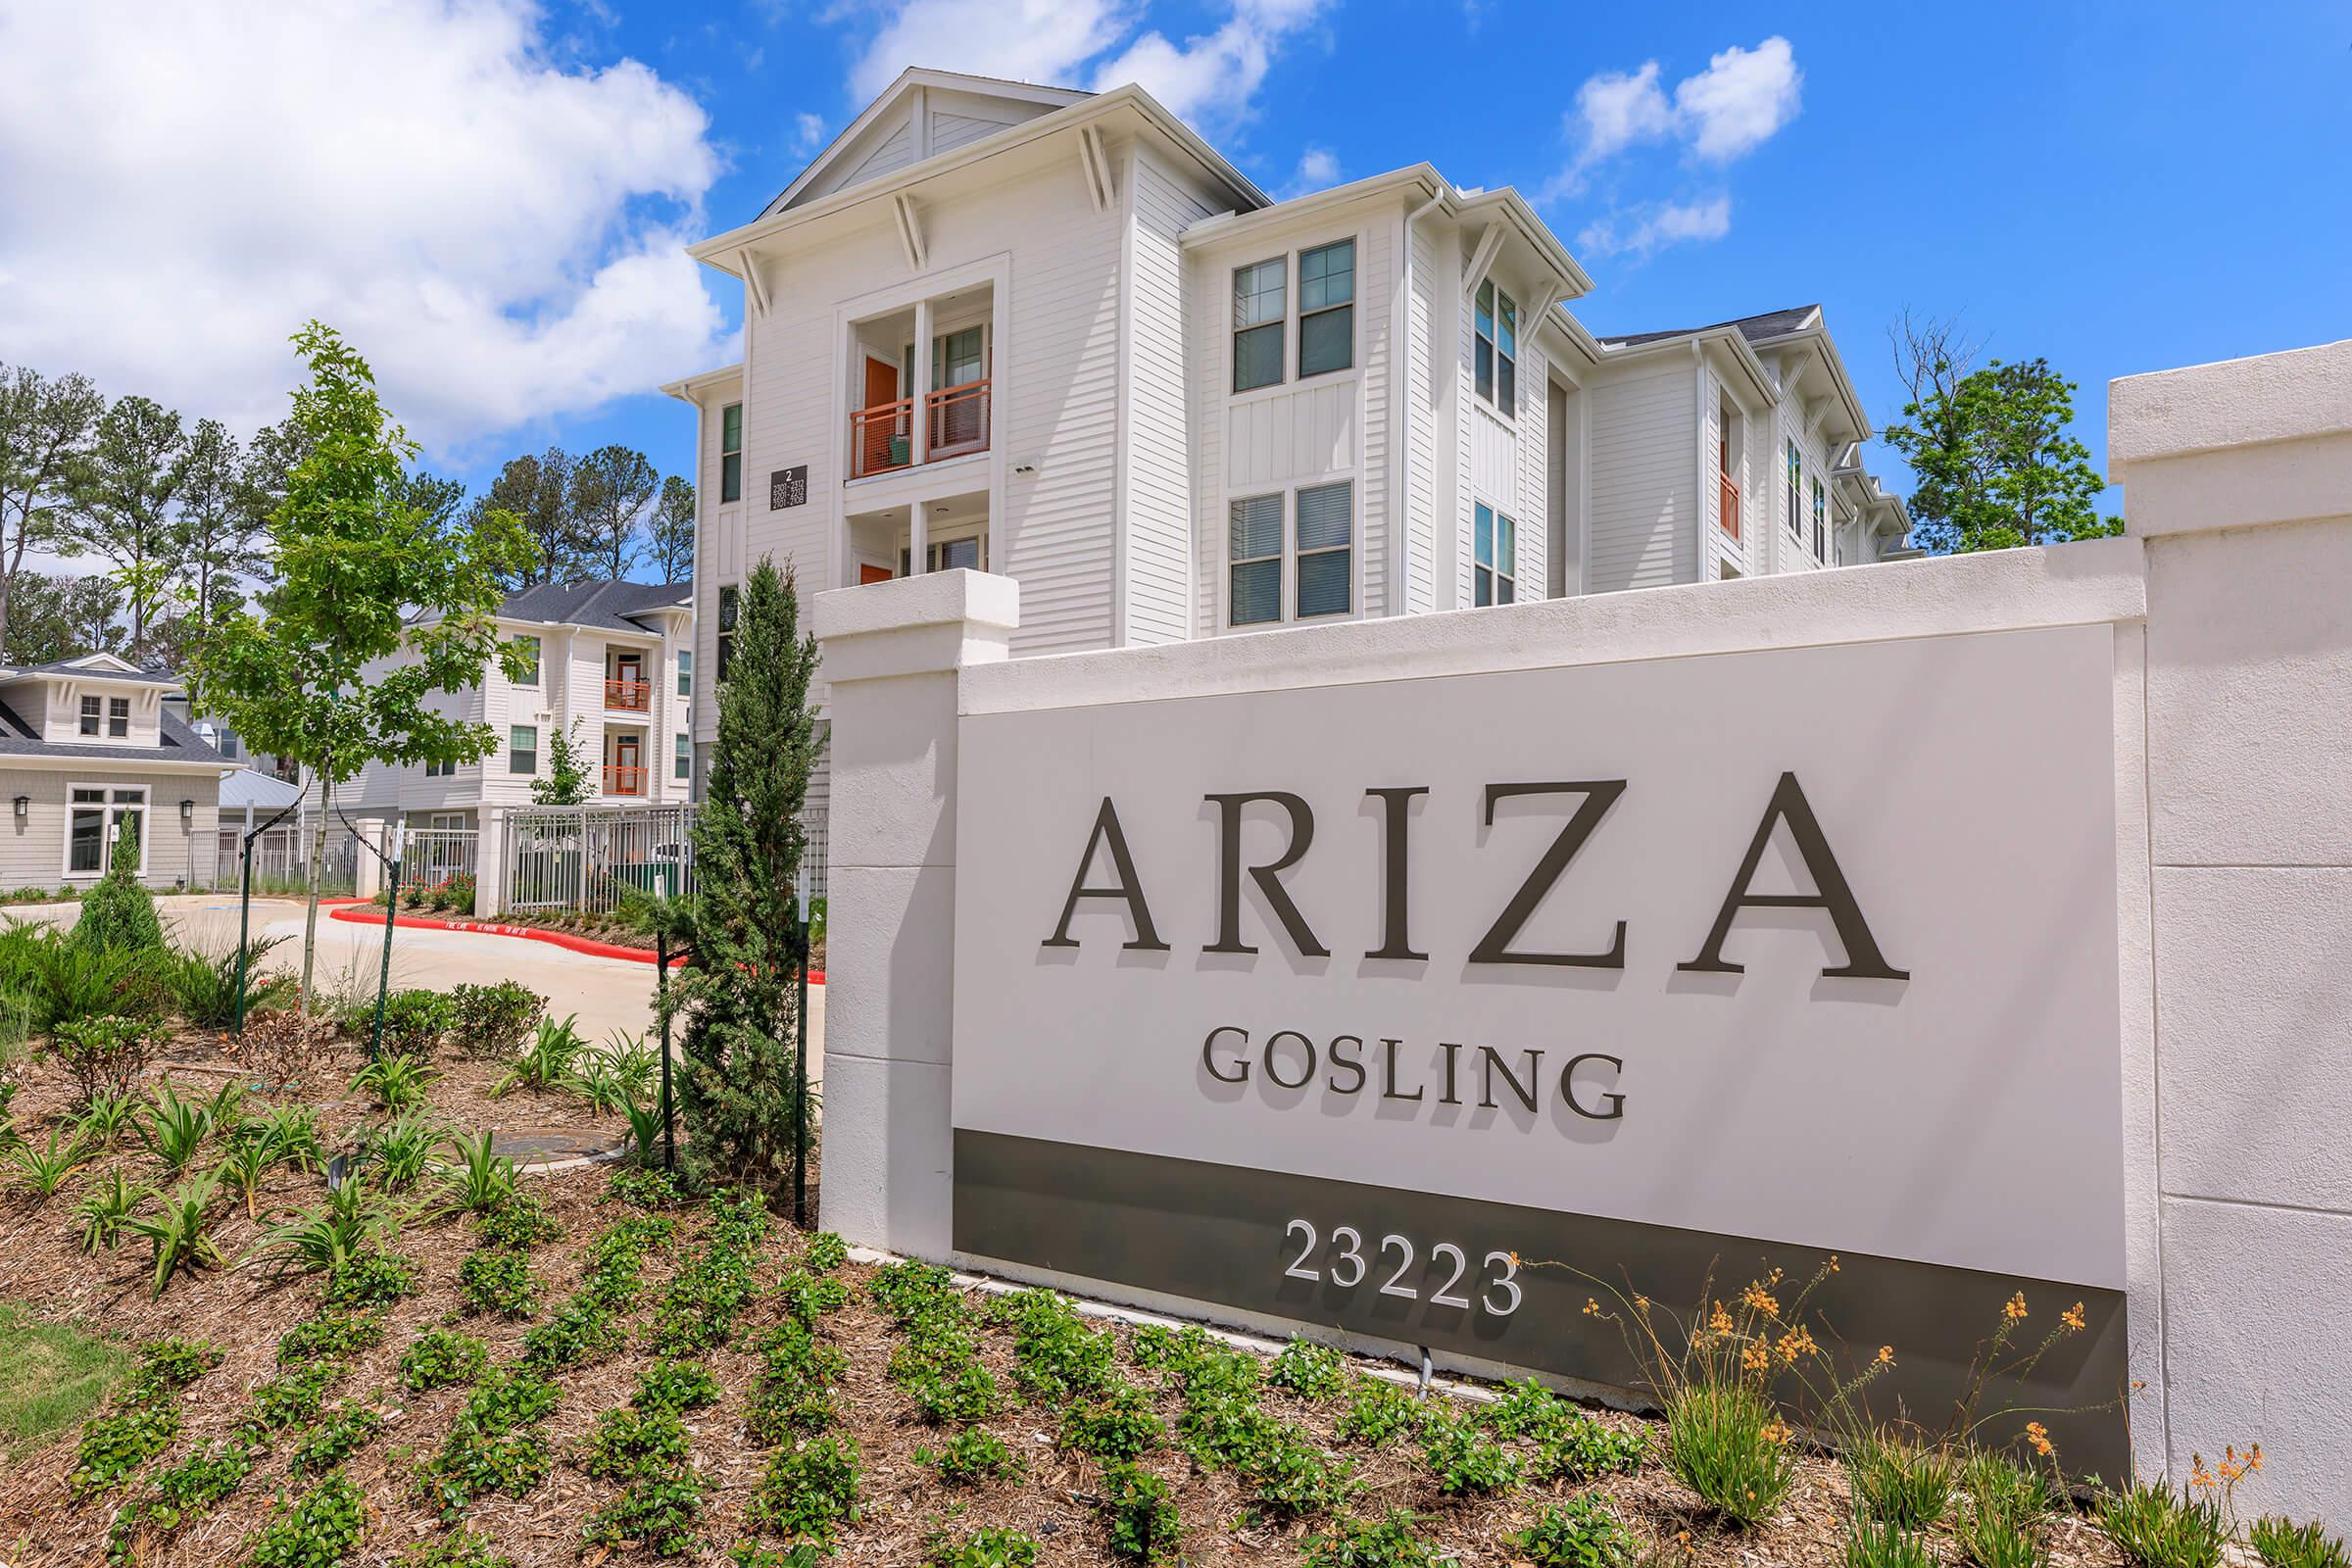 Welcome home to Ariza Gosling in Spring, Texas